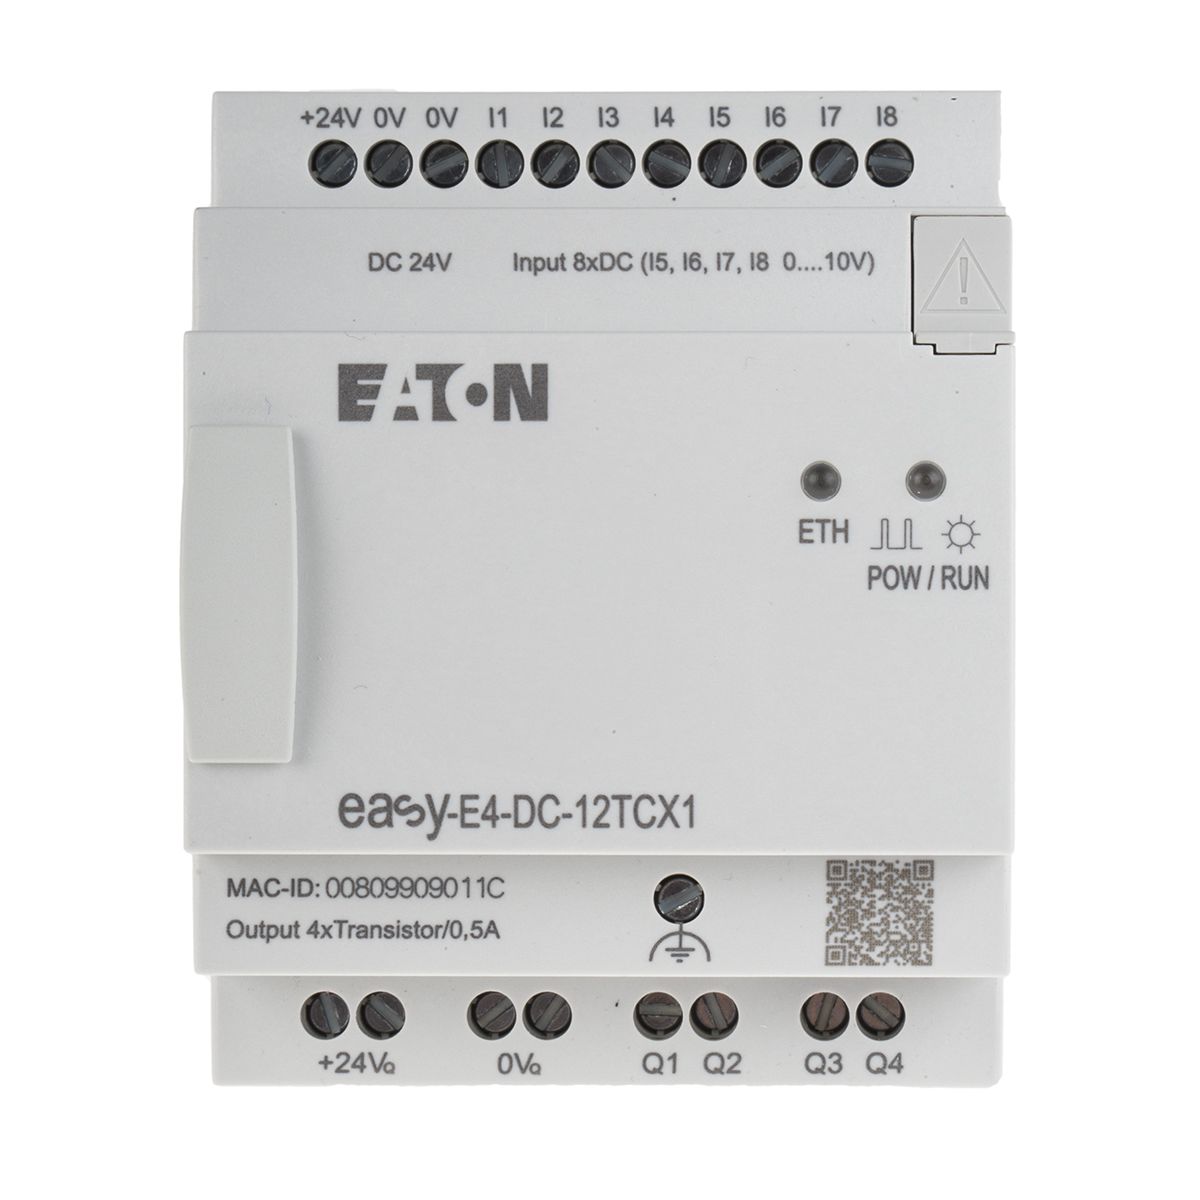 Eaton, easy, Logic Module - 4 (Analogue), 8 (Digital) Inputs, 4 Outputs, Transistor, For Use With easyE4, Ethernet